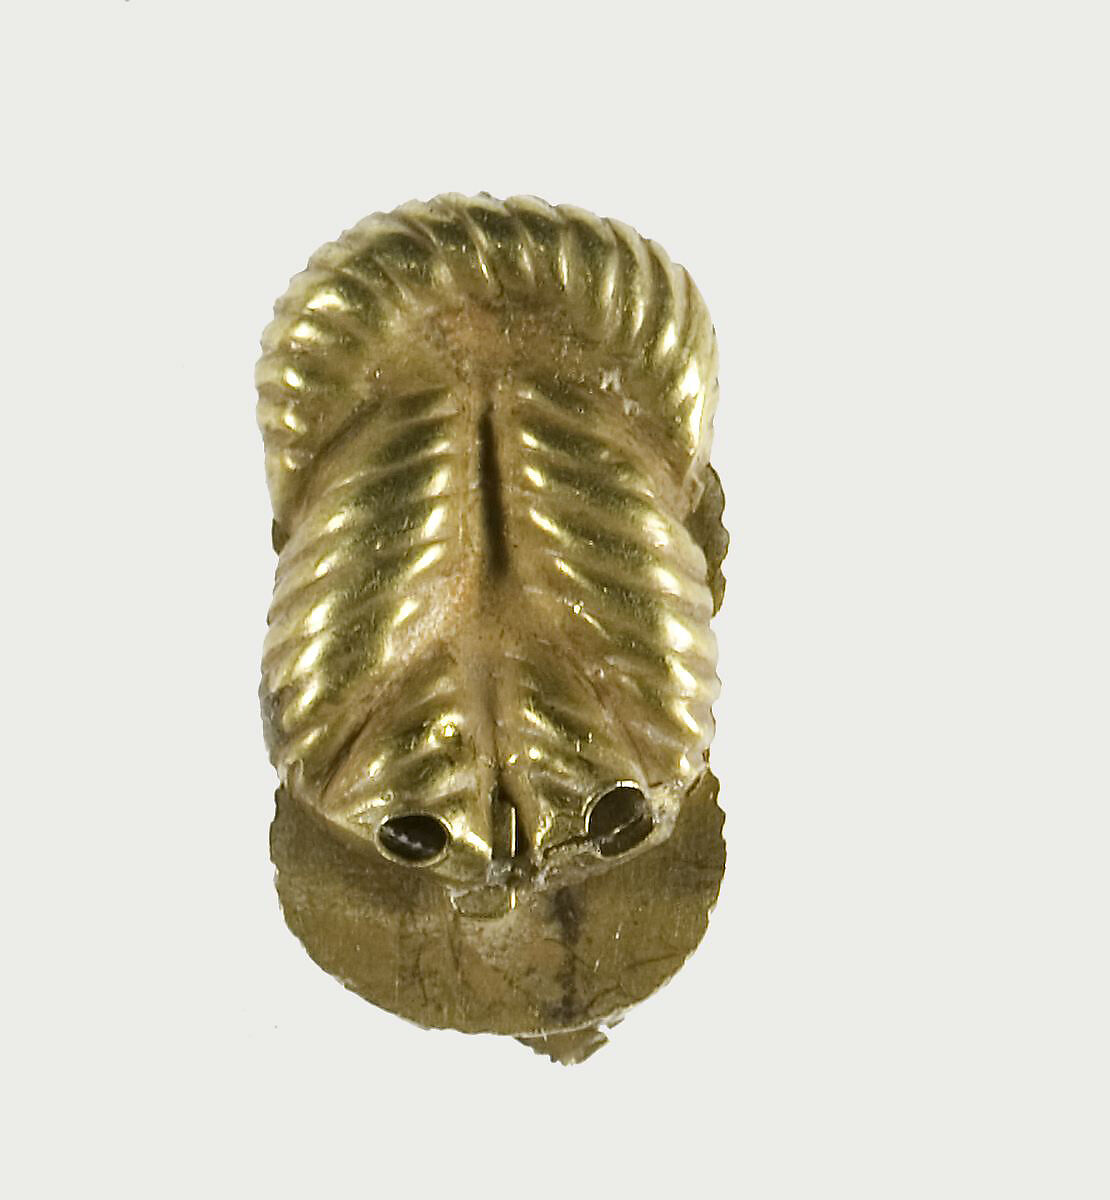 Double knot clasp of Sithathoryunet, Gold